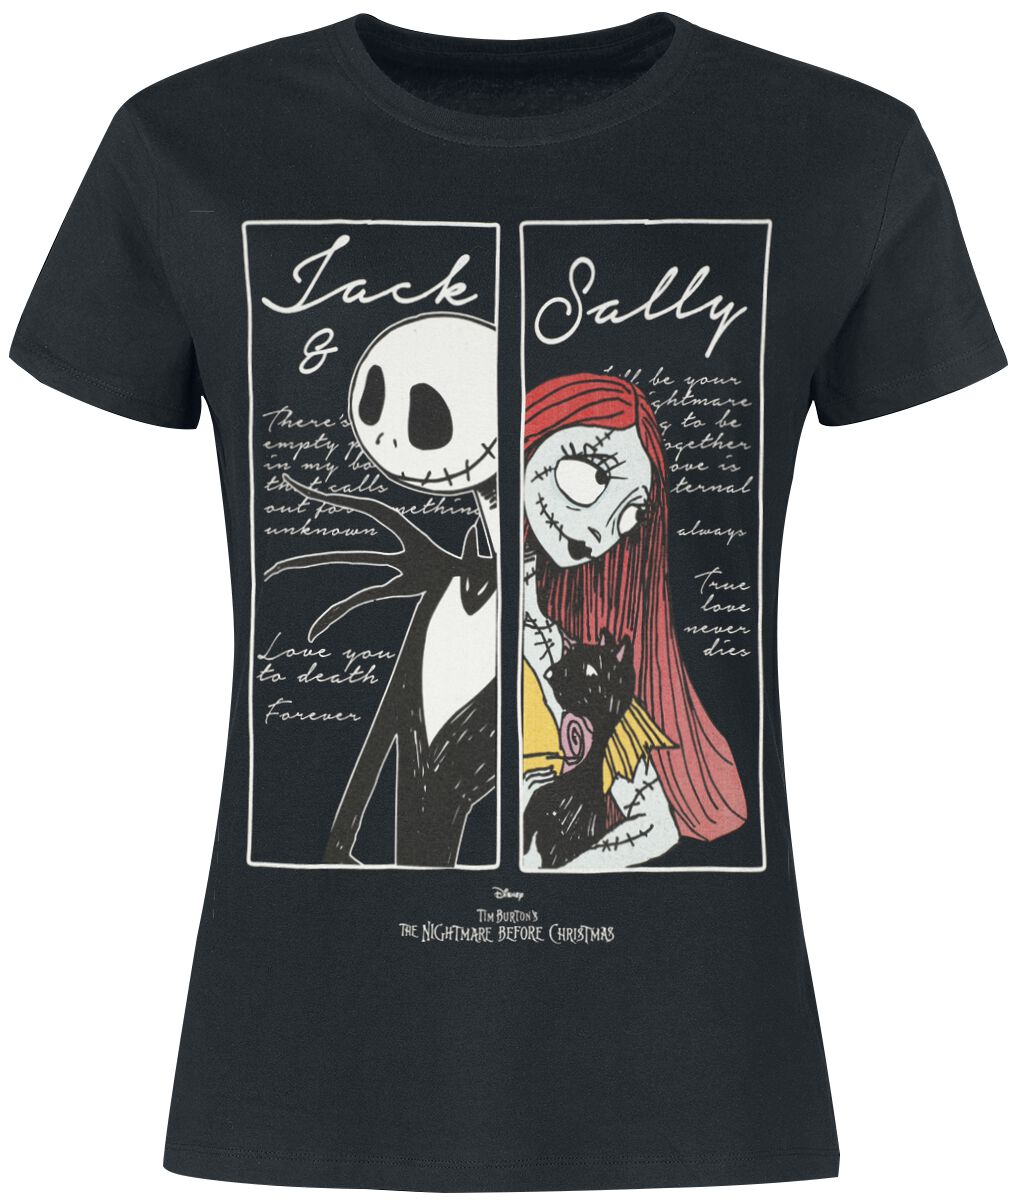 The Nightmare Before Christmas Jack & Sally T-Shirt schwarz in XL